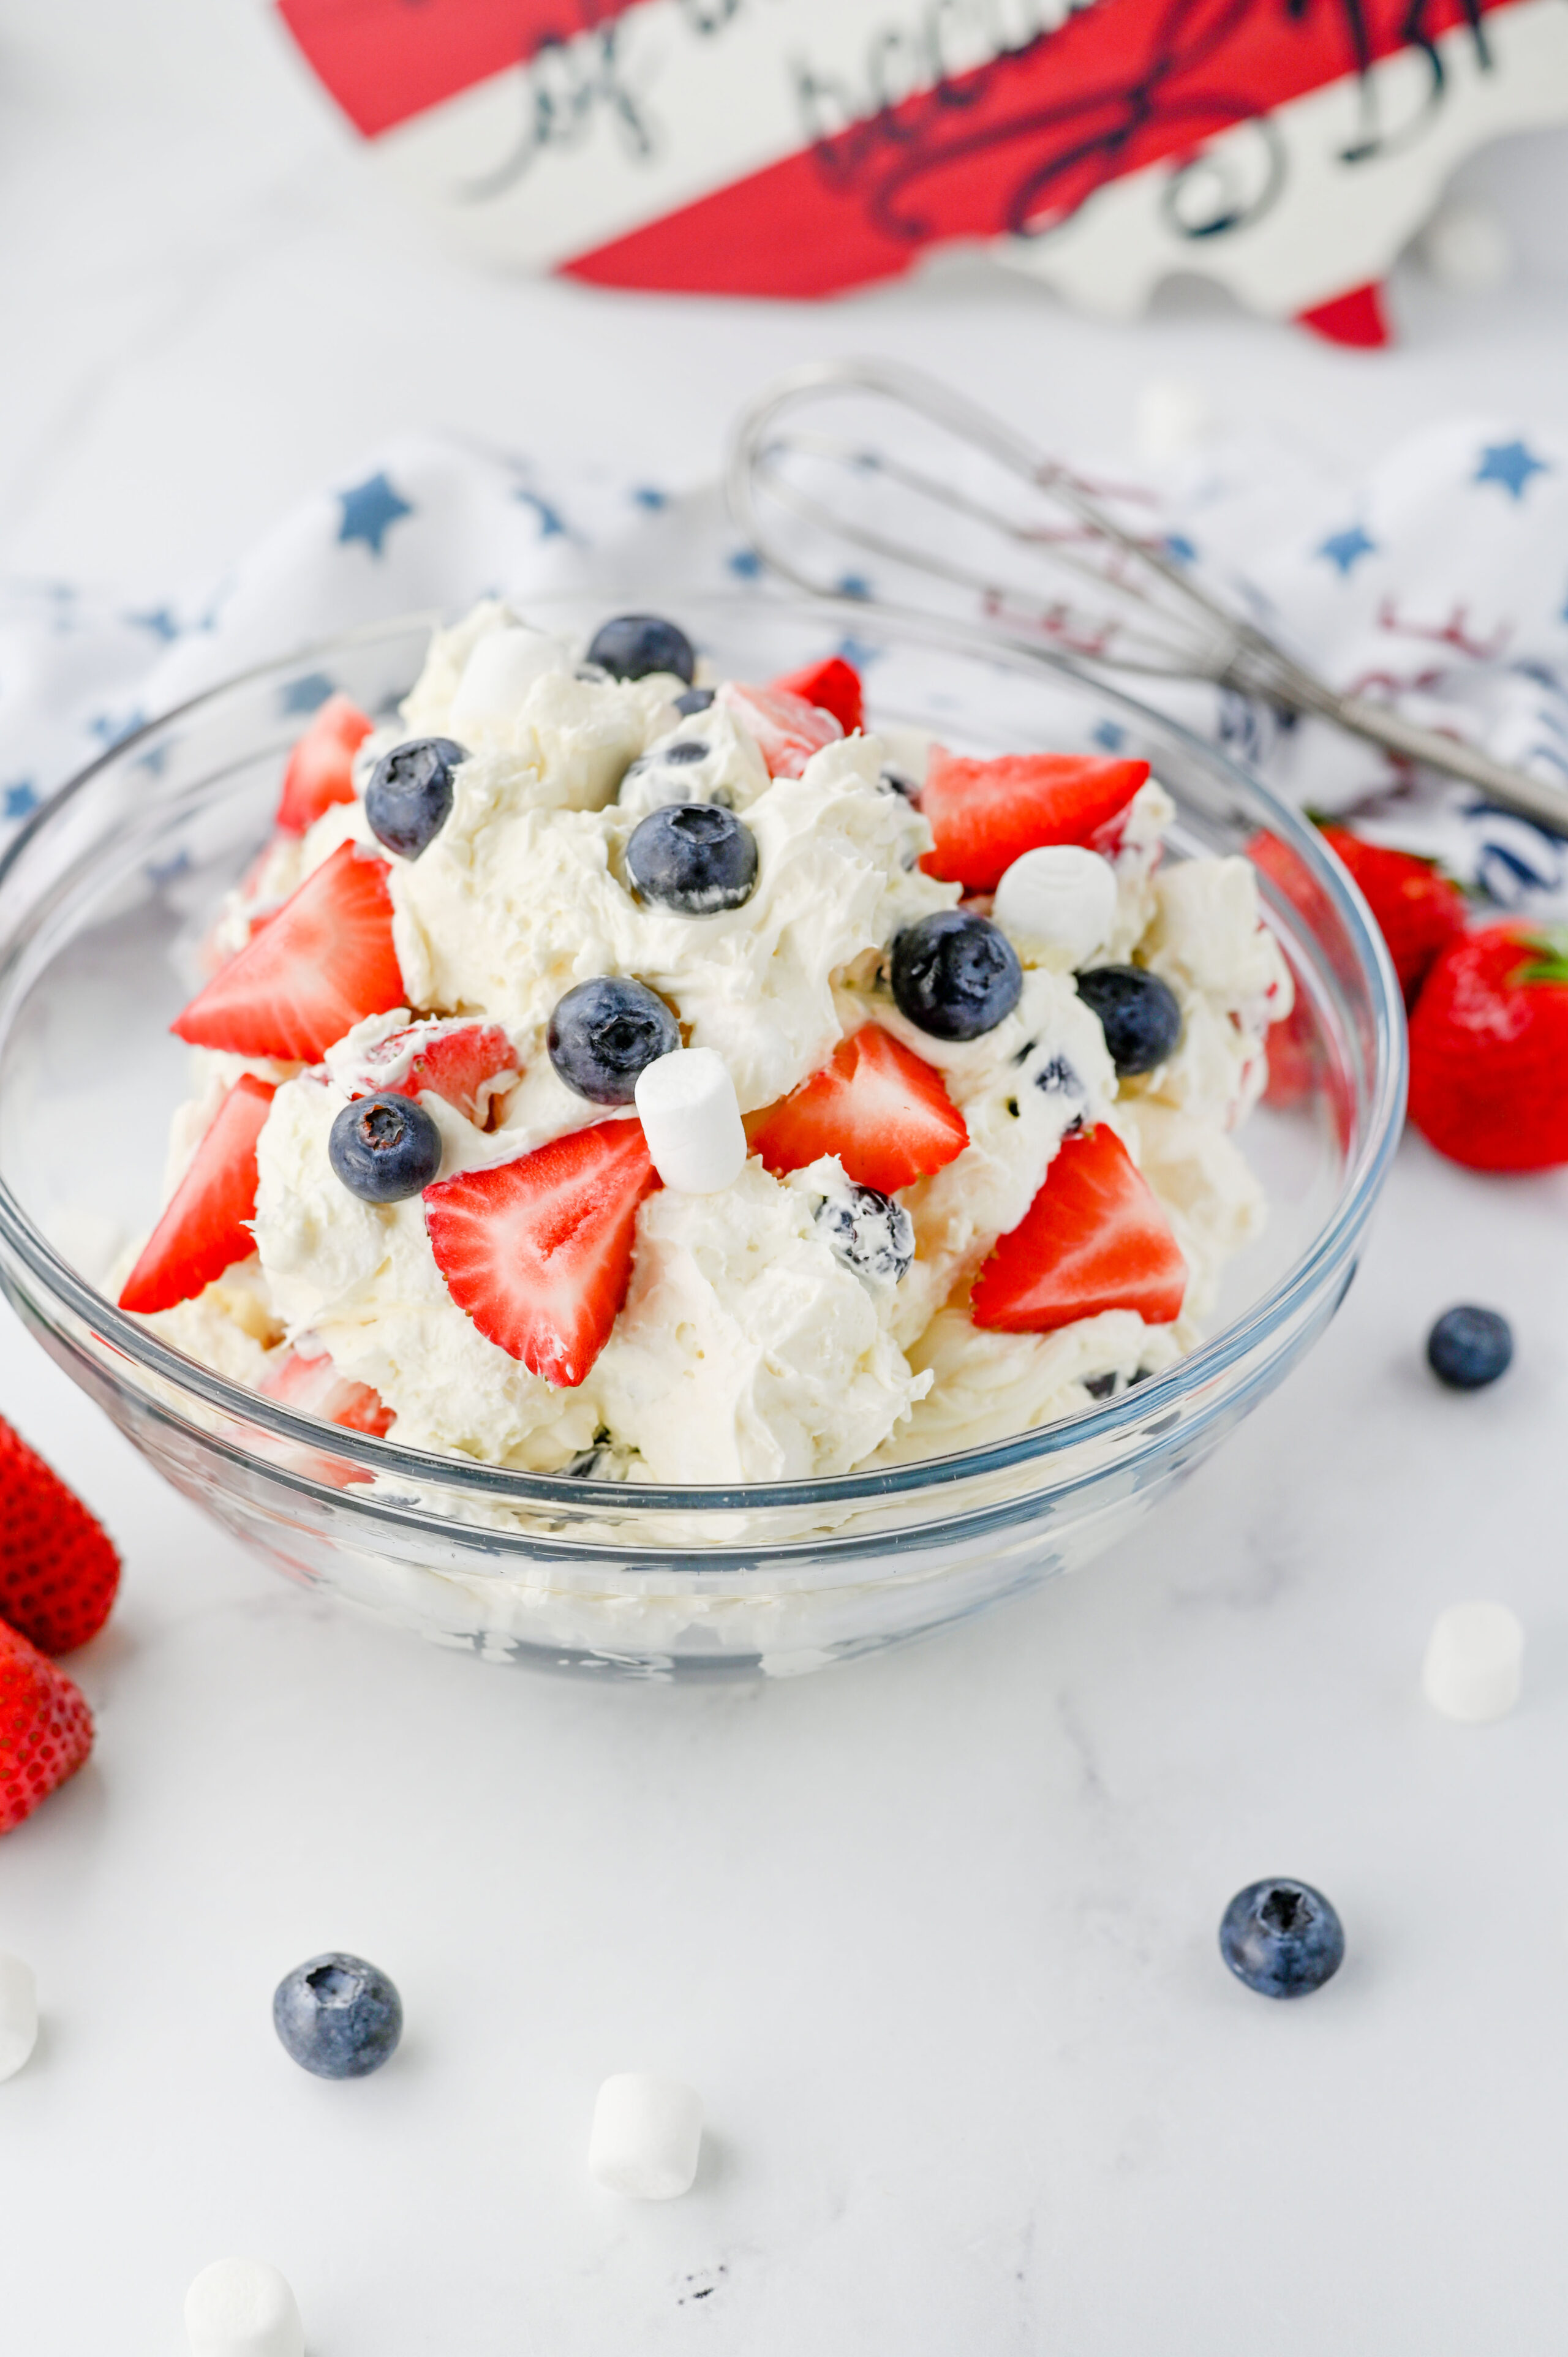 creamy cheesecake salad made with strawberries and blueberries in a glass bowl.